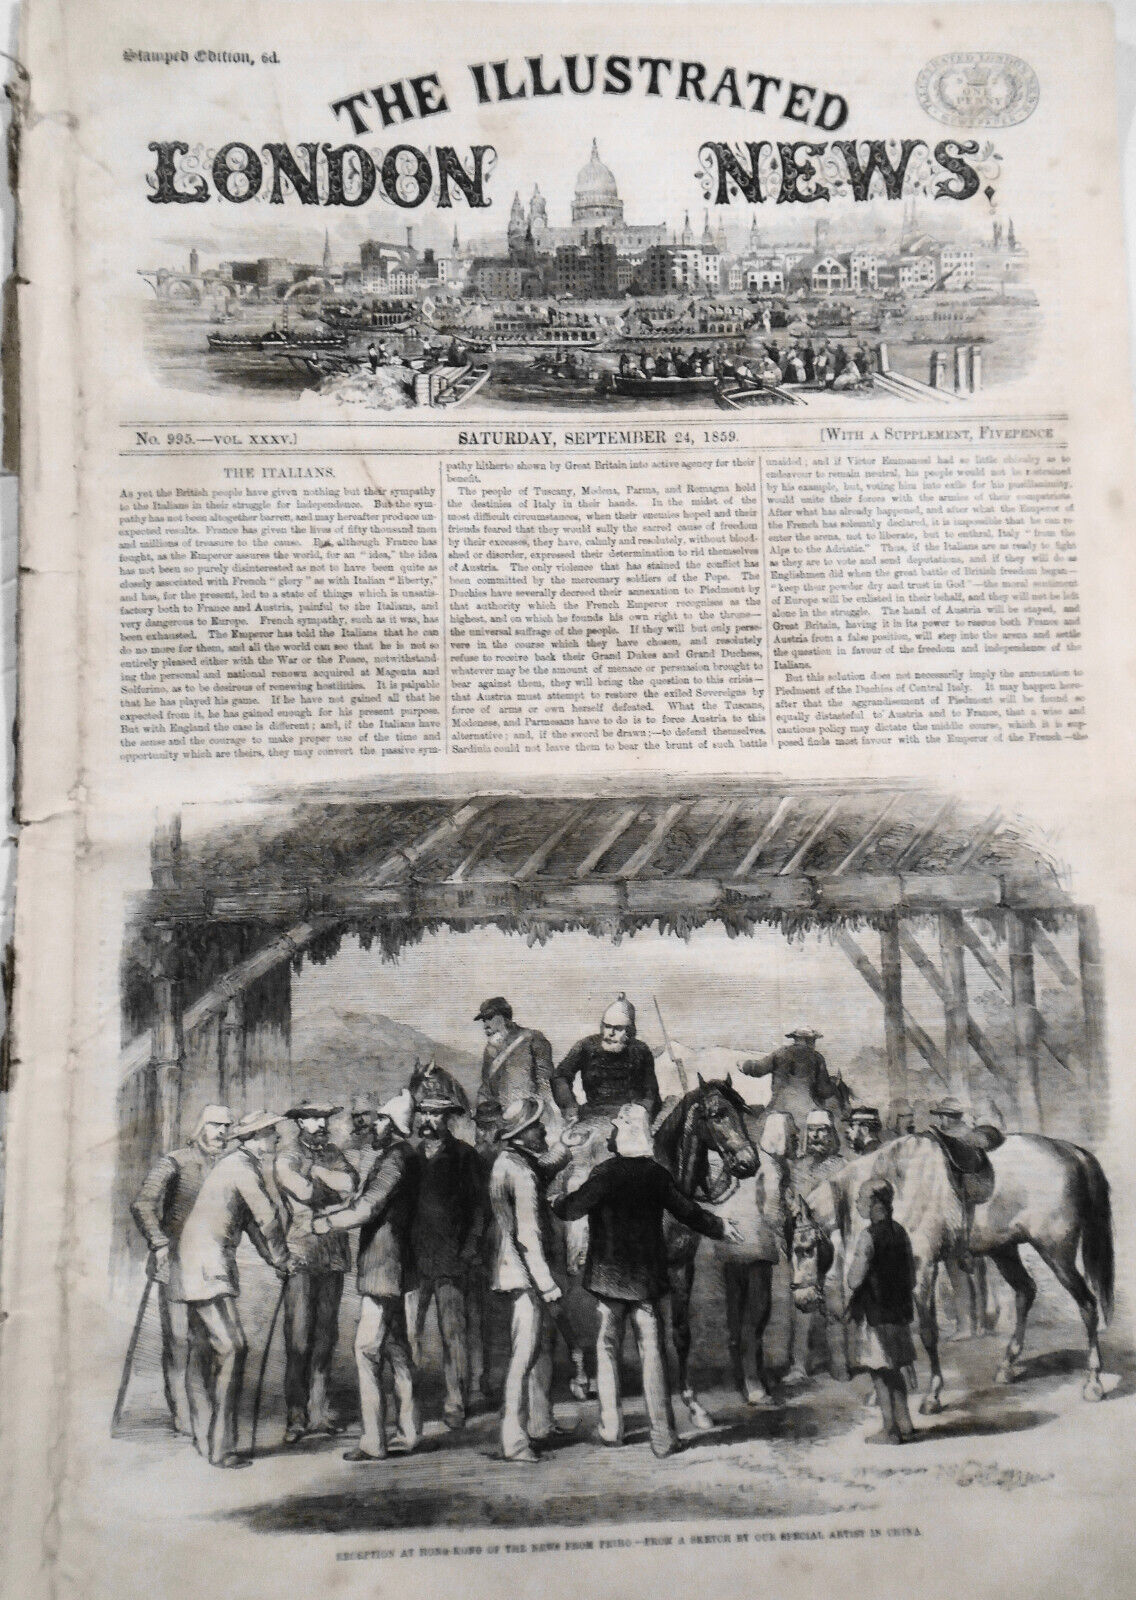 Illustrated London News, 9/24/1859 - Attack on Chinese fortifications at Peiho